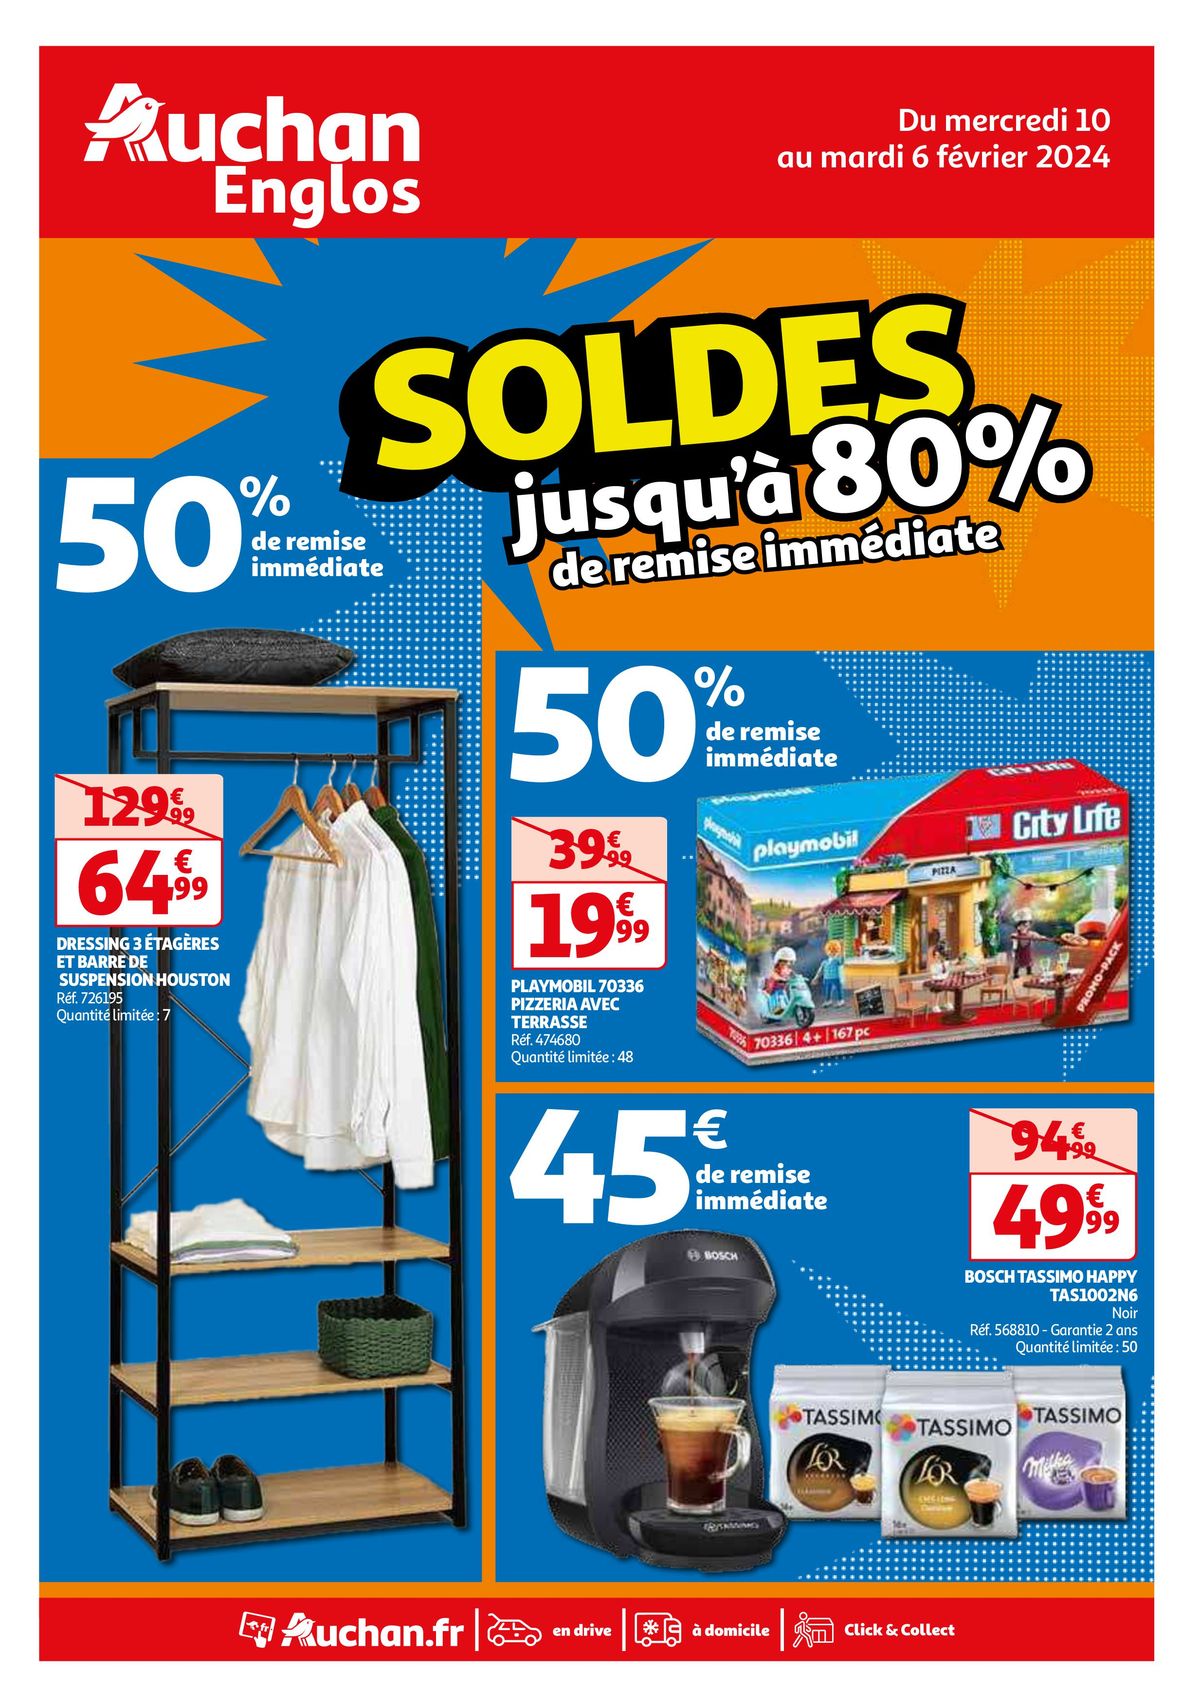 Catalogue SOLDES AUCHAN ENGLOS, page 00001